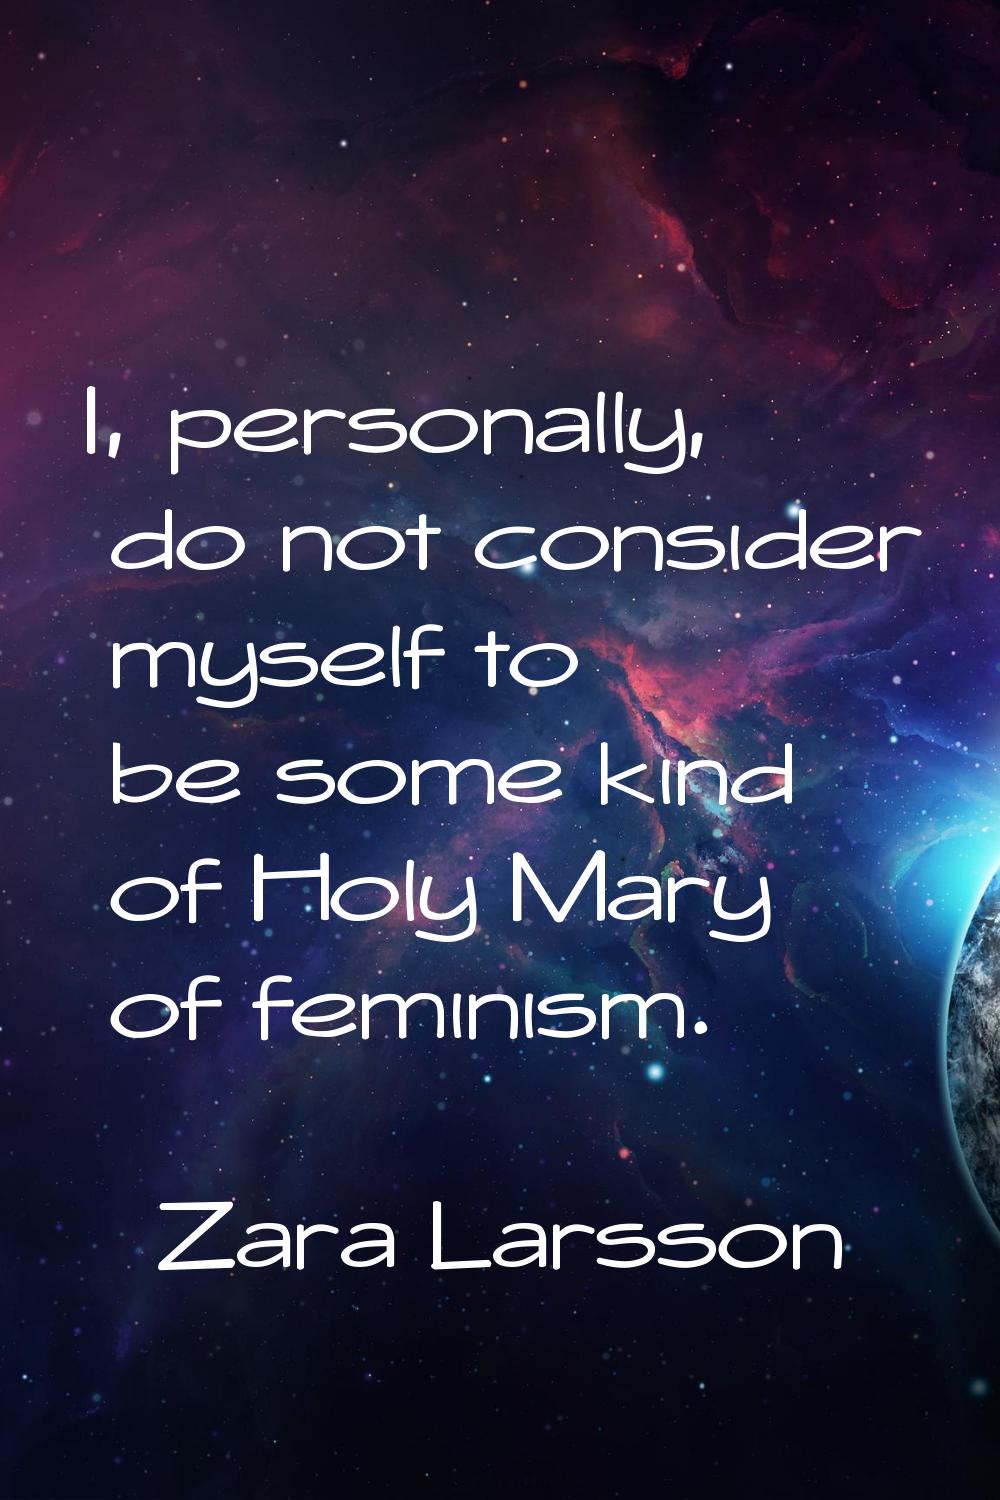 I, personally, do not consider myself to be some kind of Holy Mary of feminism.